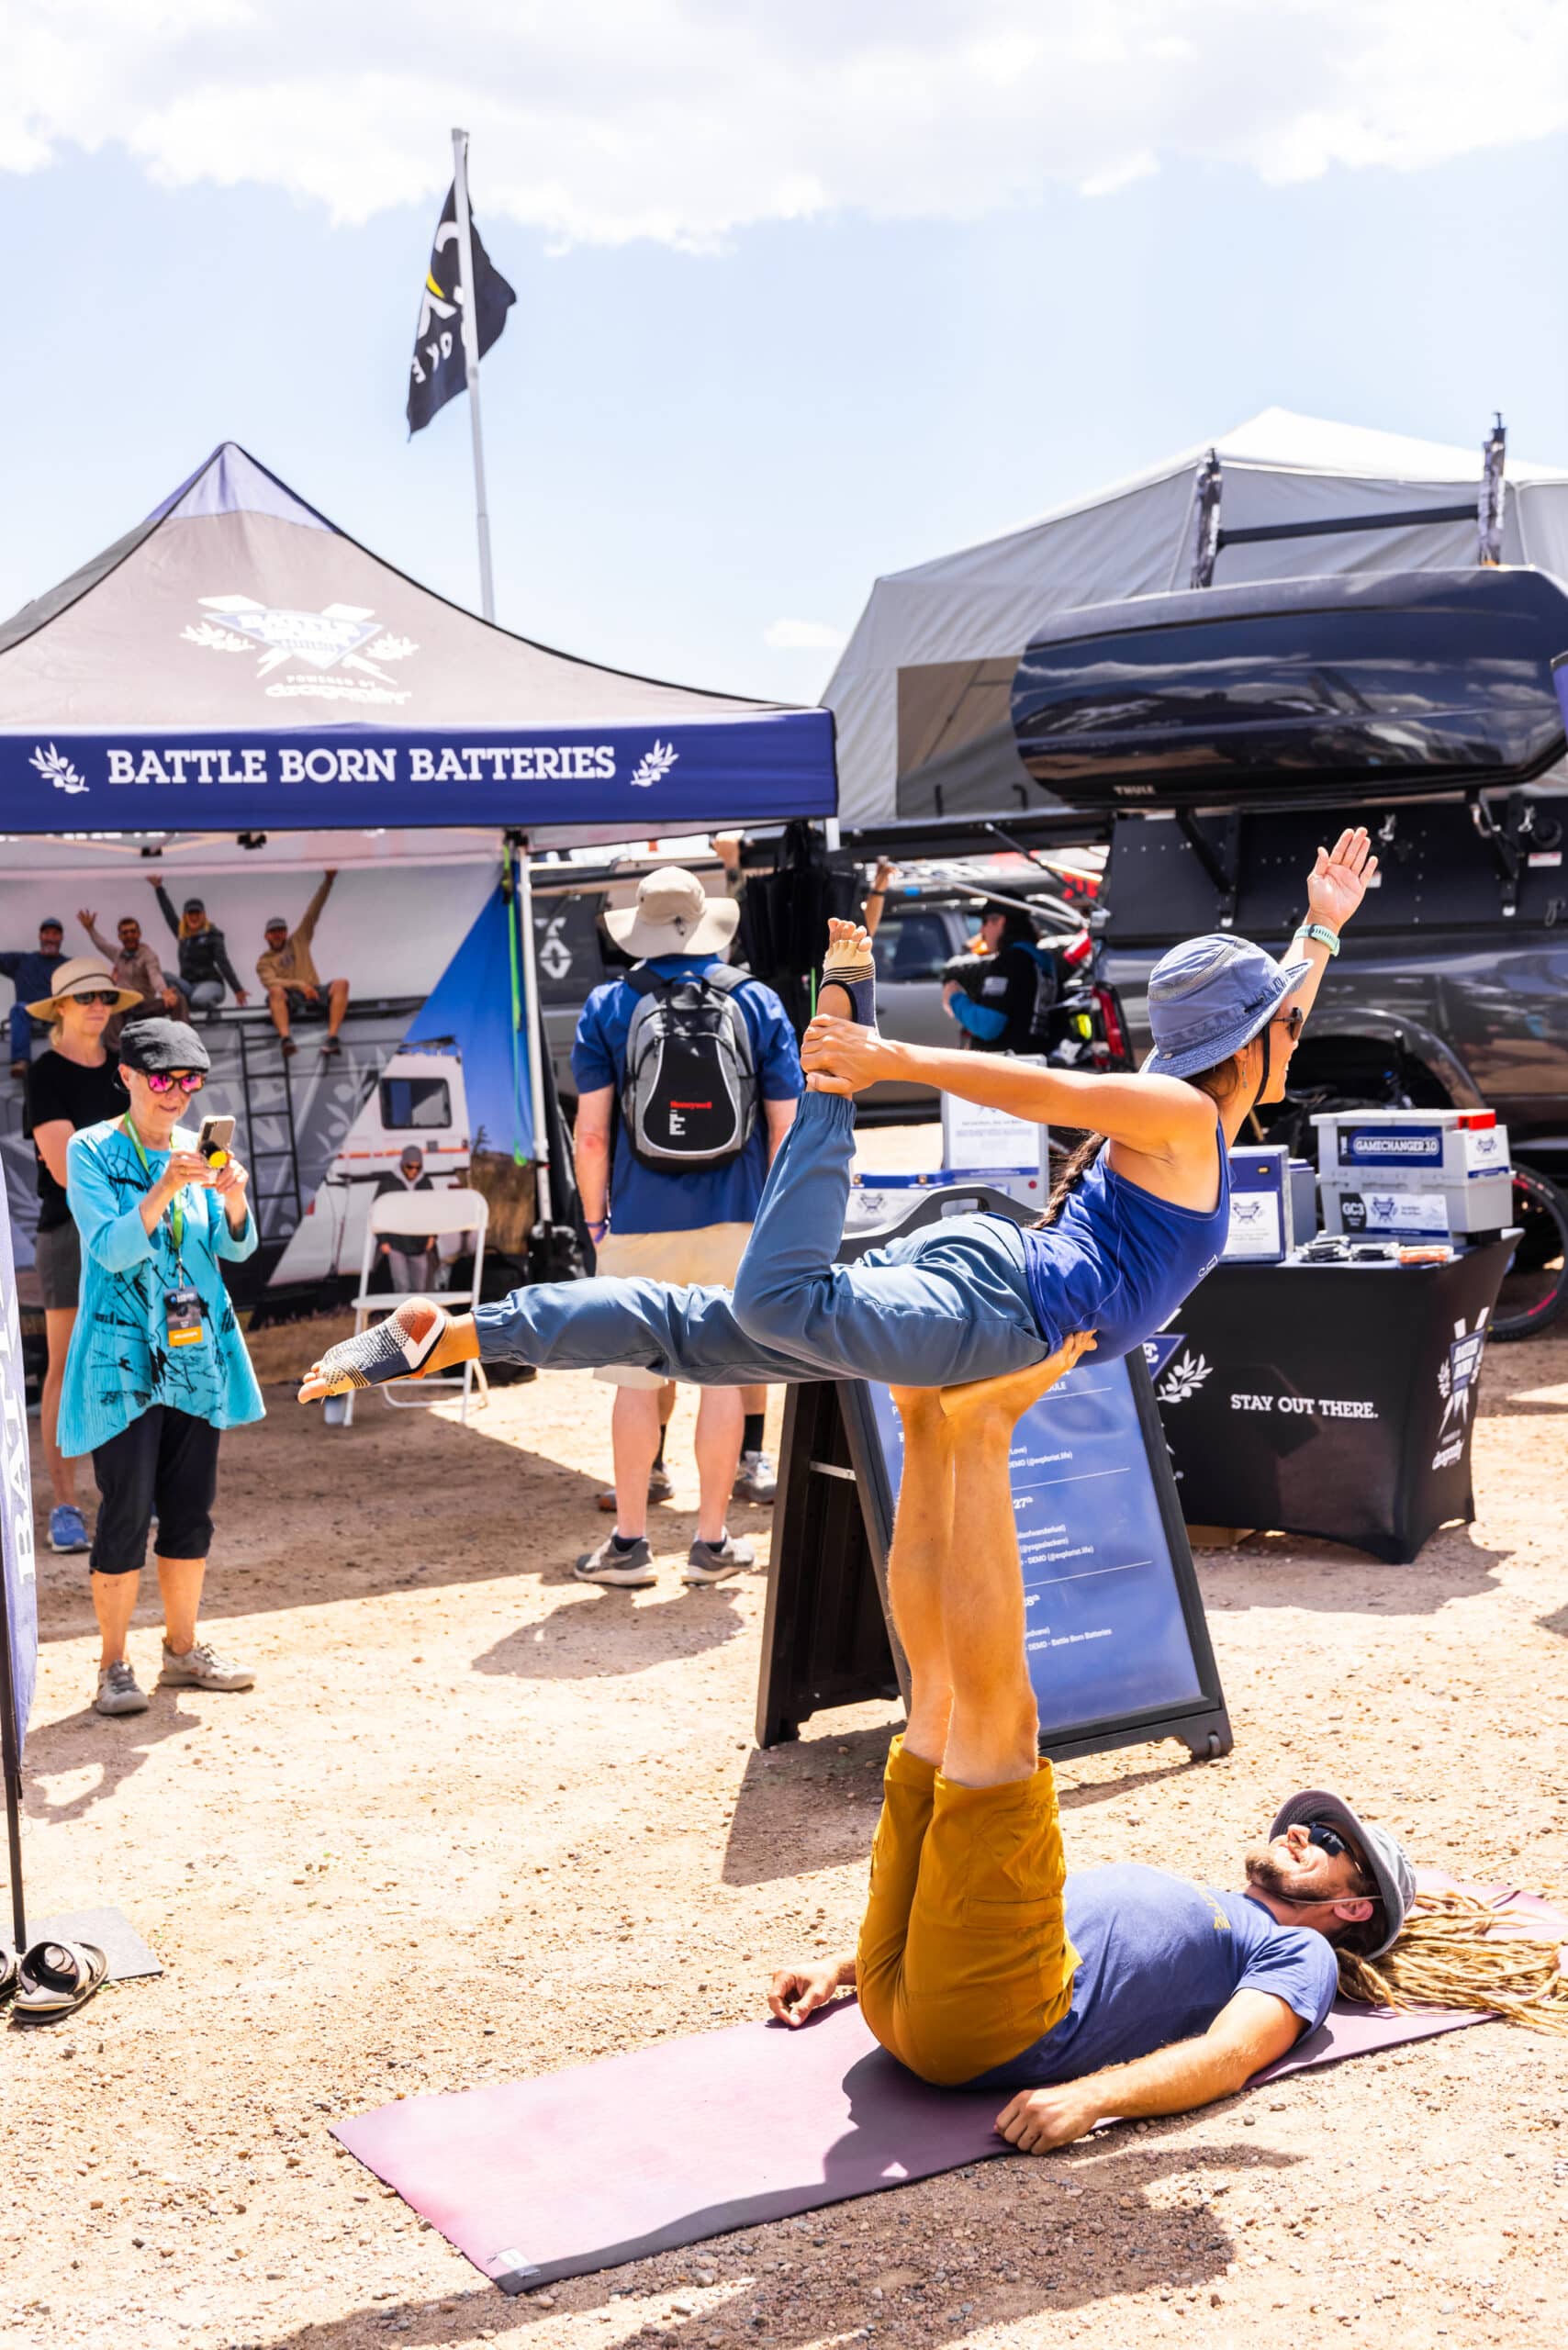 YogaSlackers at the Battle Born Batteries Booth at the Overland Expo